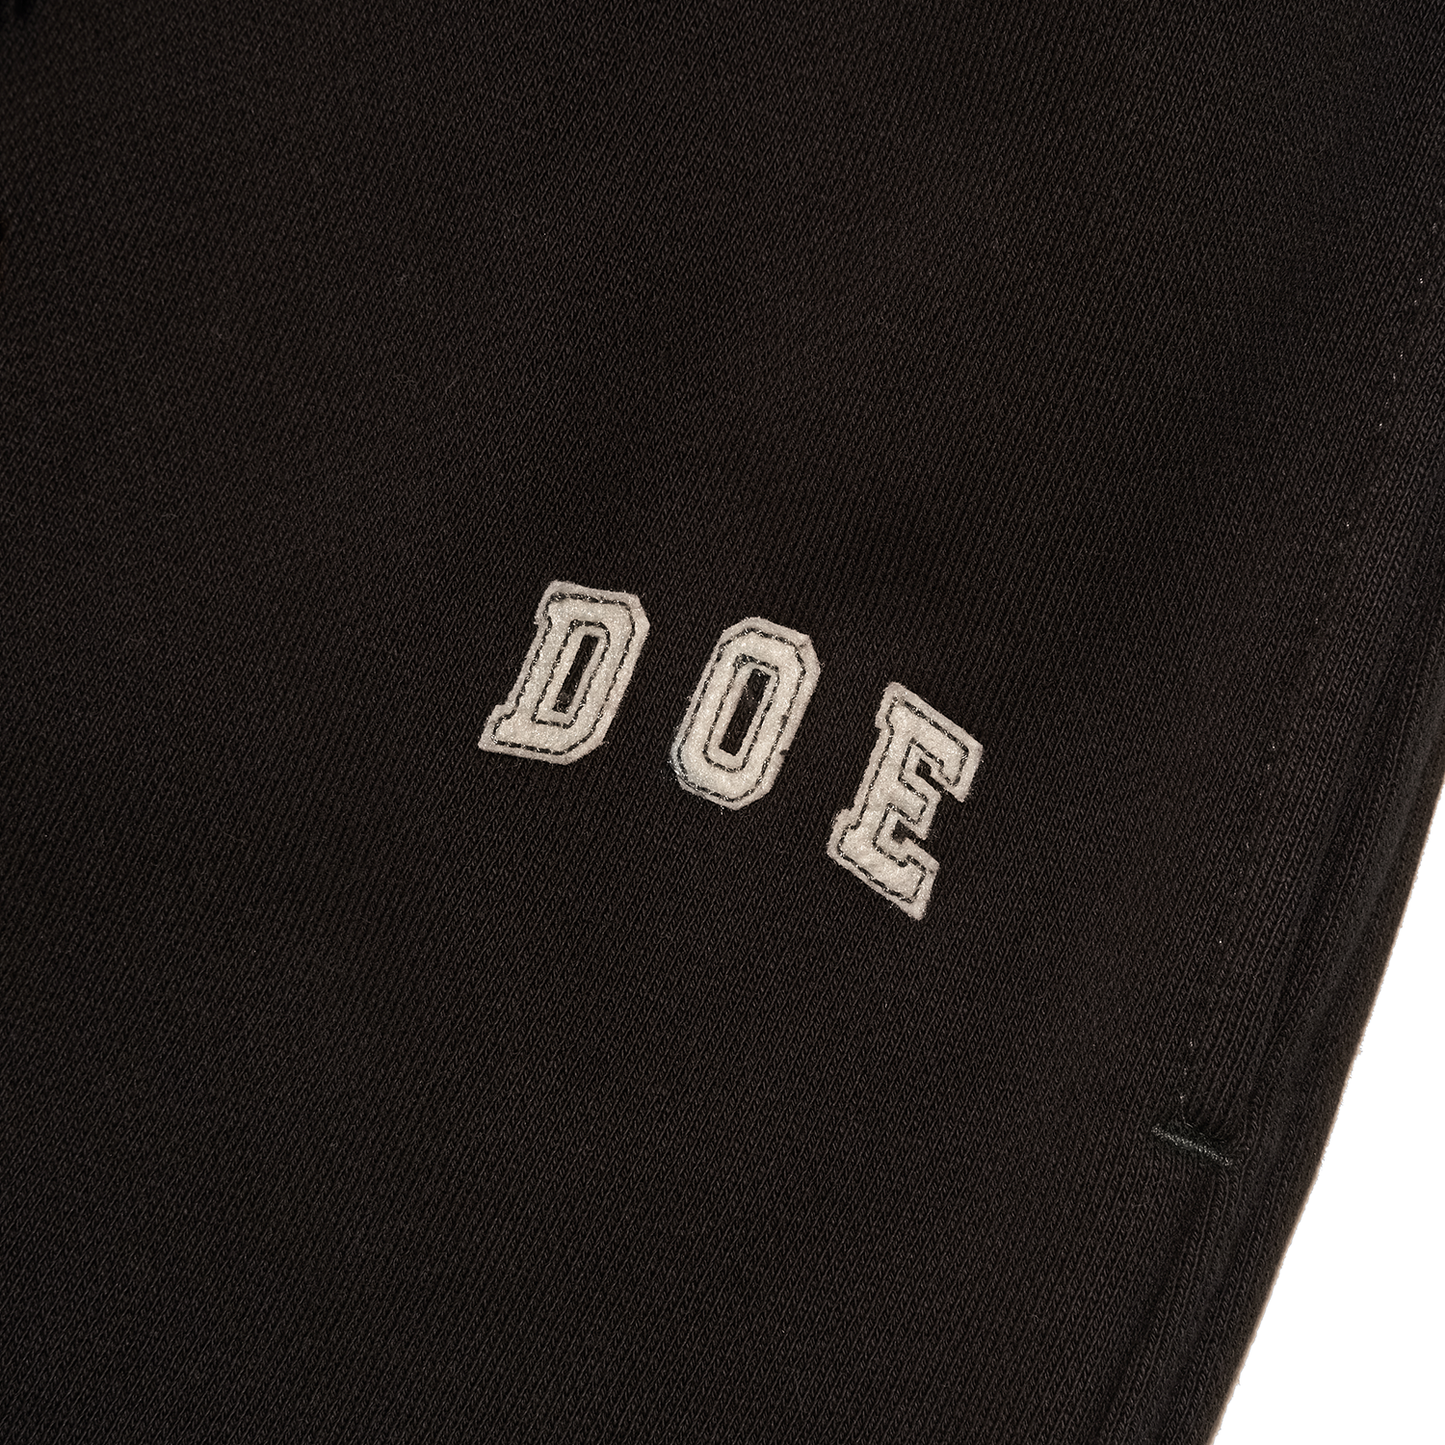 DOE DYED COLLEGE LOGO EMBROIDERY SWEATPANTS